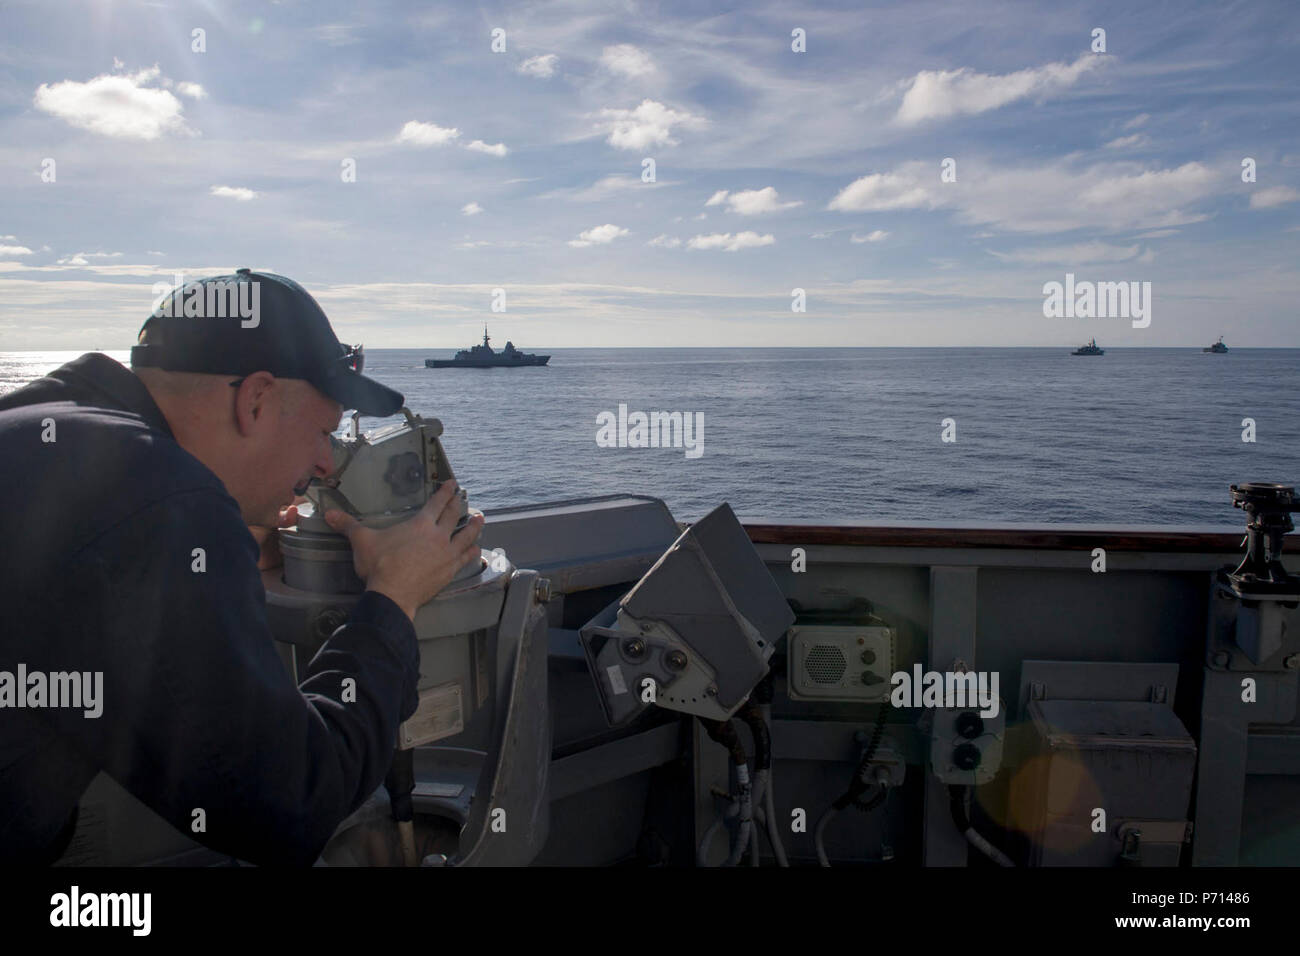 SOUTH CHINA SEA (May 11, 2017) Lt. Cmdr. Joseph McDonald, a Detroit native, uses a telescopic alidade to track Republic of Singapore ship RSS Intrepid (FFS 69), Royal Thai Navy ship HTMS Naresuan (FFG 421), and Independence-class littoral combat ship USS Coronado (LCS 4) aboard Arleigh Burke-class guided-missile destroyer USS Sterett (DDG 104) during a divisional tactics exercise in support of the Cooperation Afloat Readiness and Training (CARAT) multilateral exercise. CARAT is a series of annual maritime exercises aimed at strengthening partnerships and increasing interoperability through bil Stock Photo